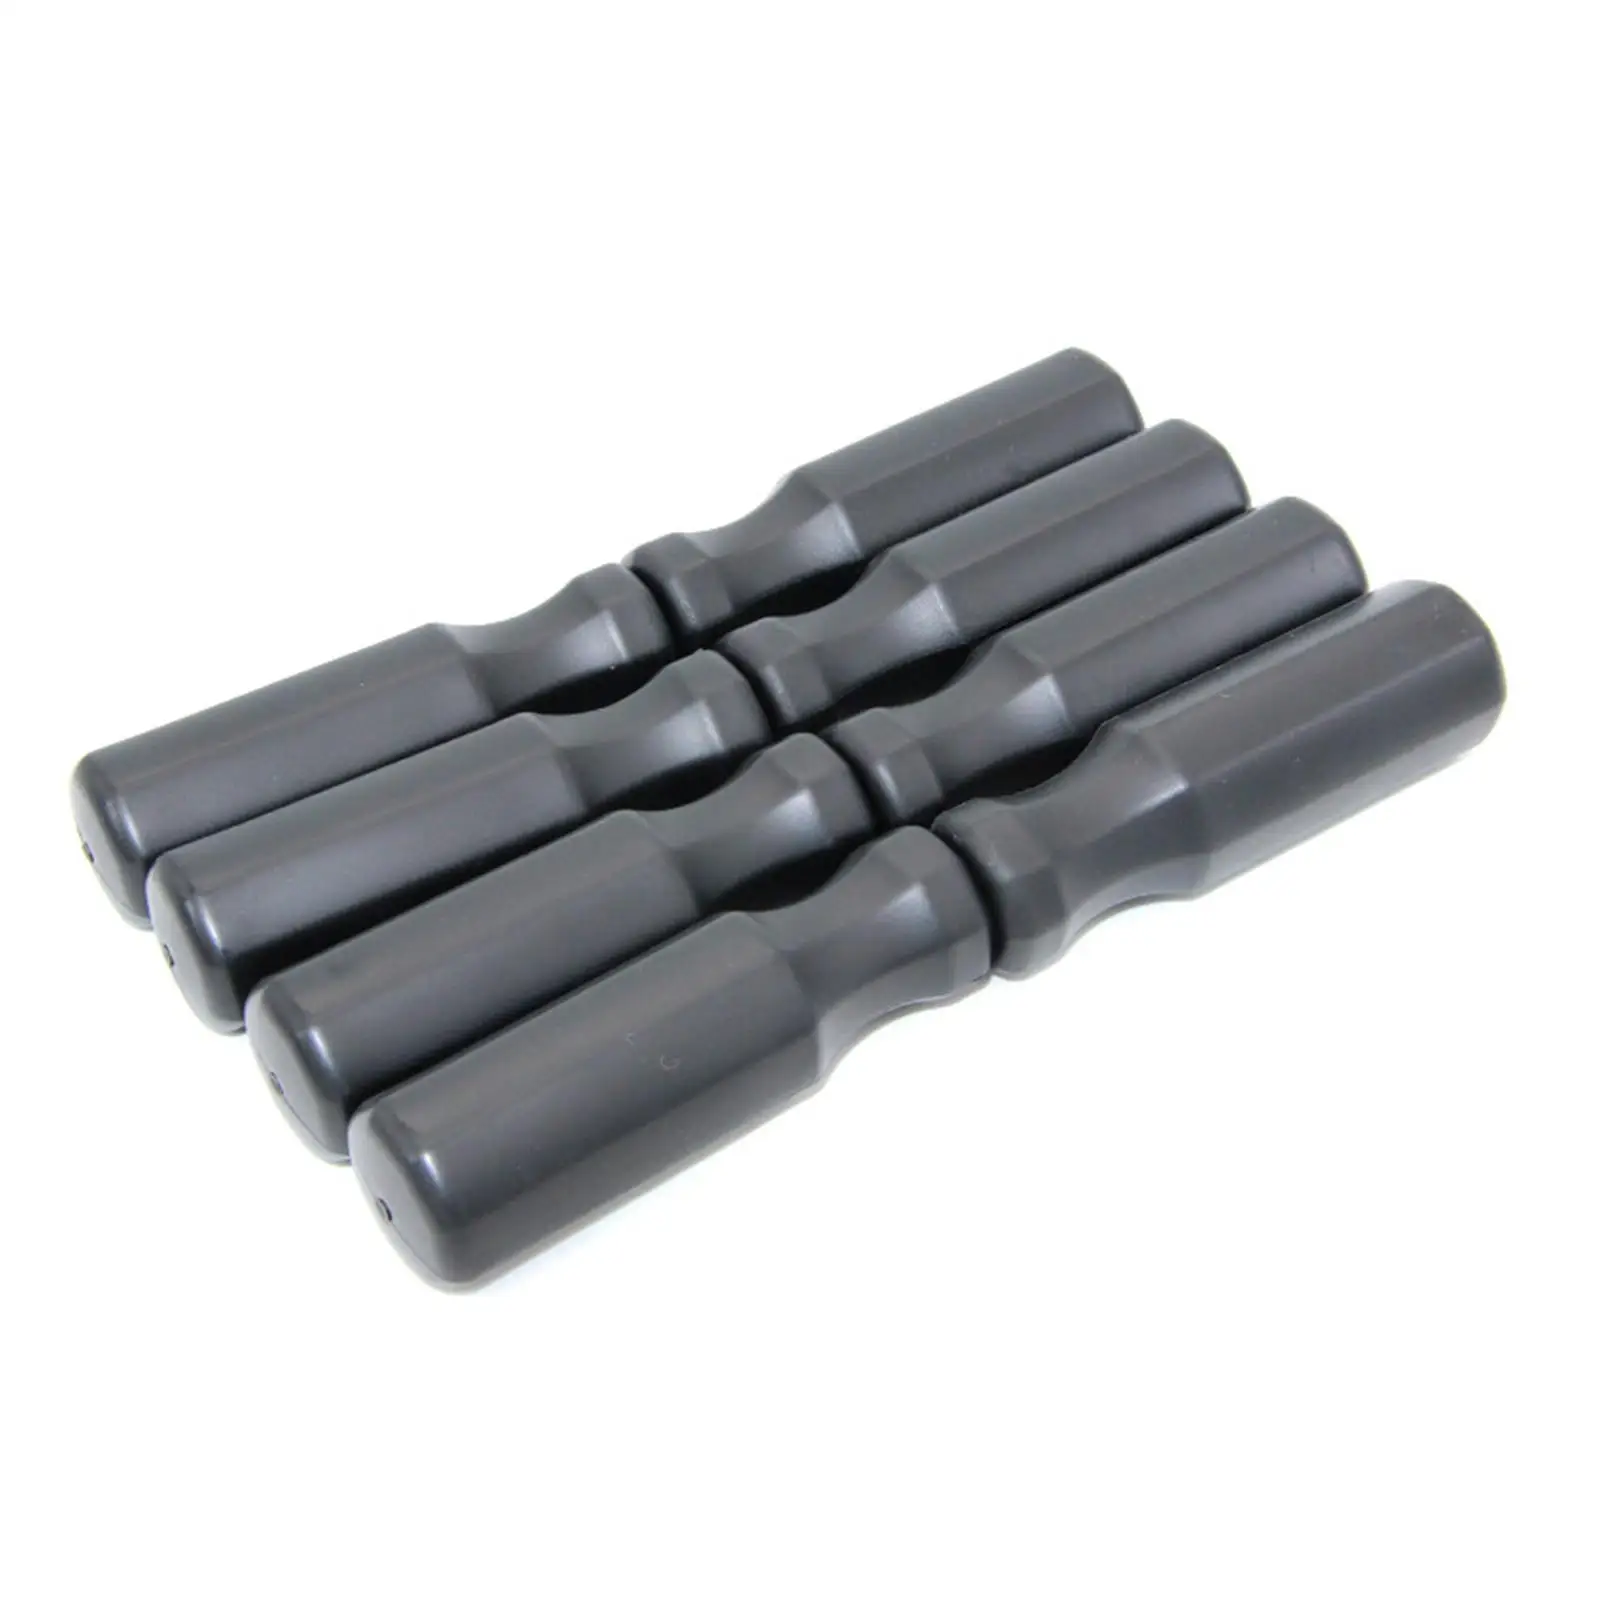 8Pcs Octagonal Replacement Handles Easy Using for Standard Foosball Tables